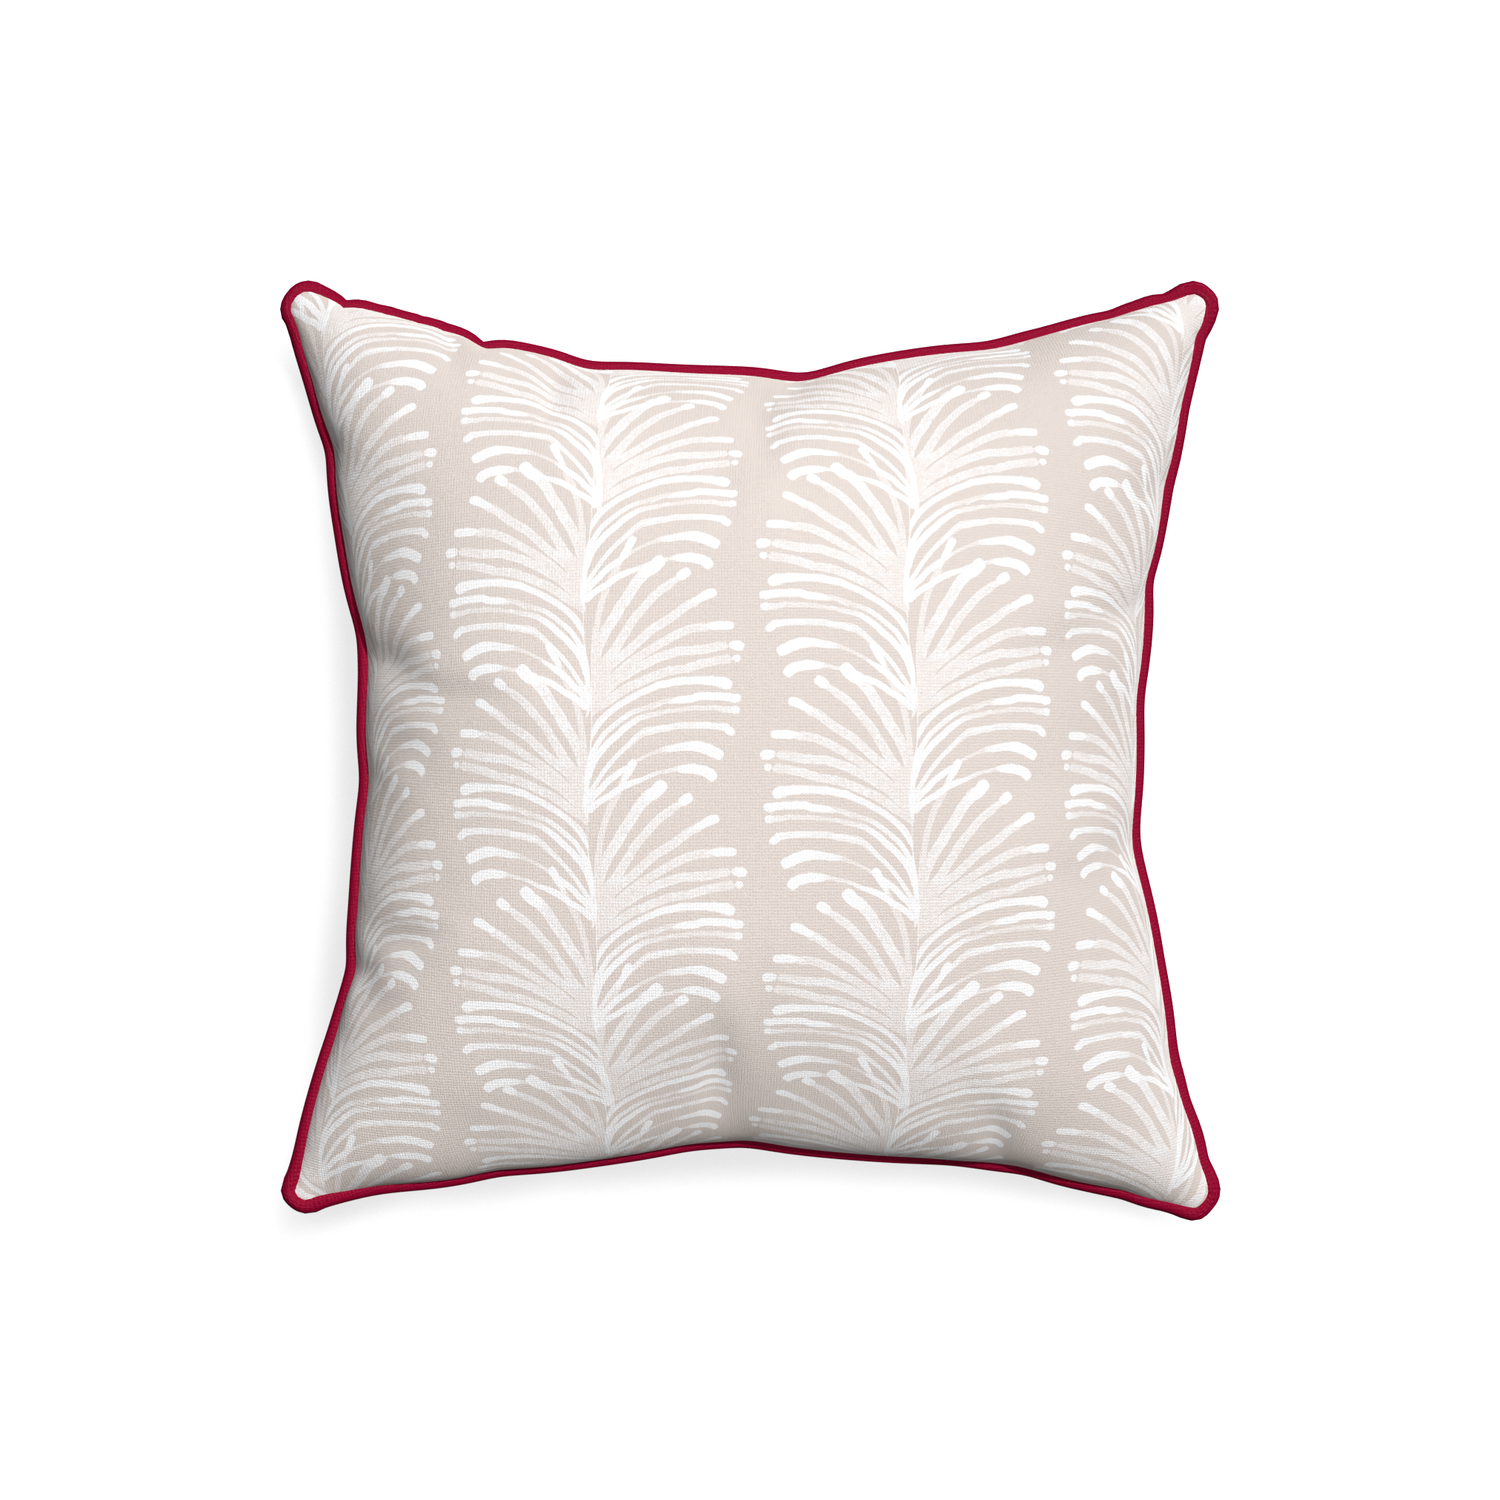 20-square emma sand custom sand colored botanical stripepillow with raspberry piping on white background